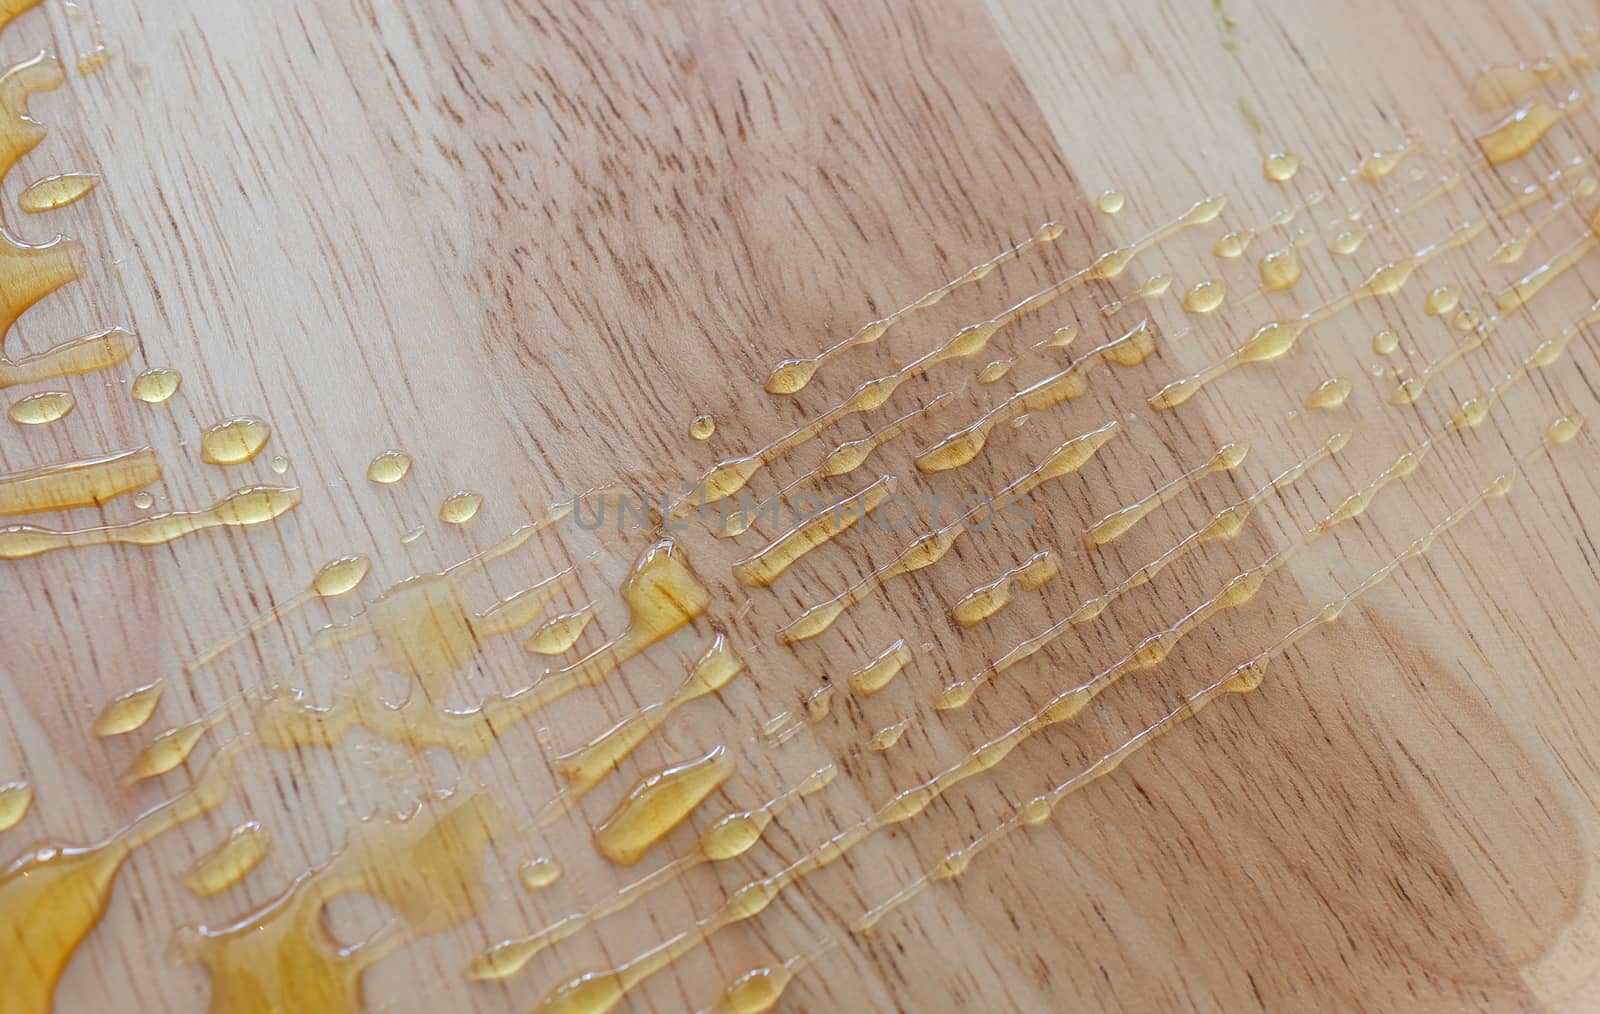 golden honey drops on natural wooden plate background